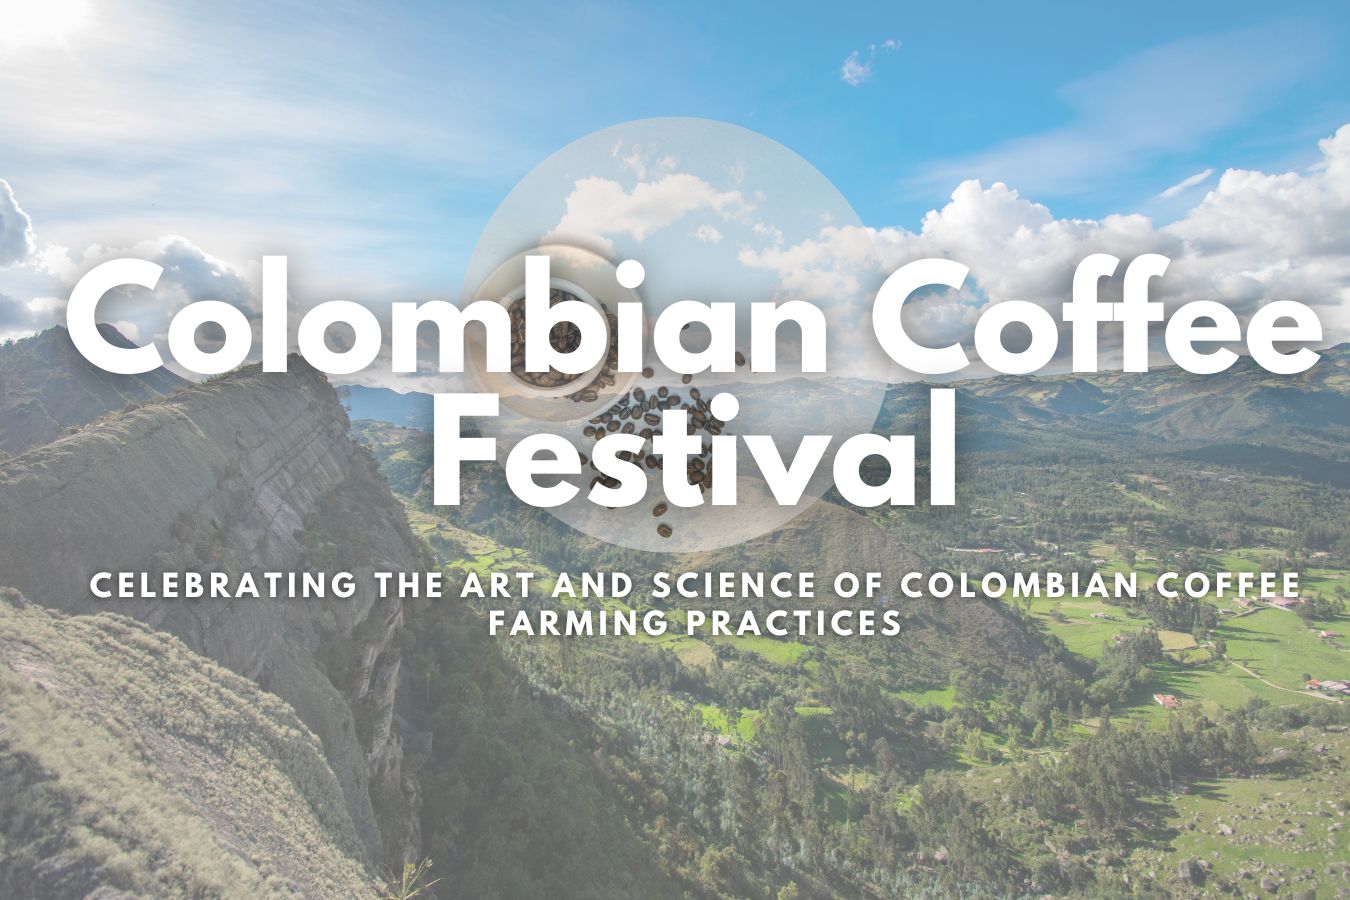 The Colombian Coffee Festival Celebrating the Art and Science of Colombian Coffee Farming Practices